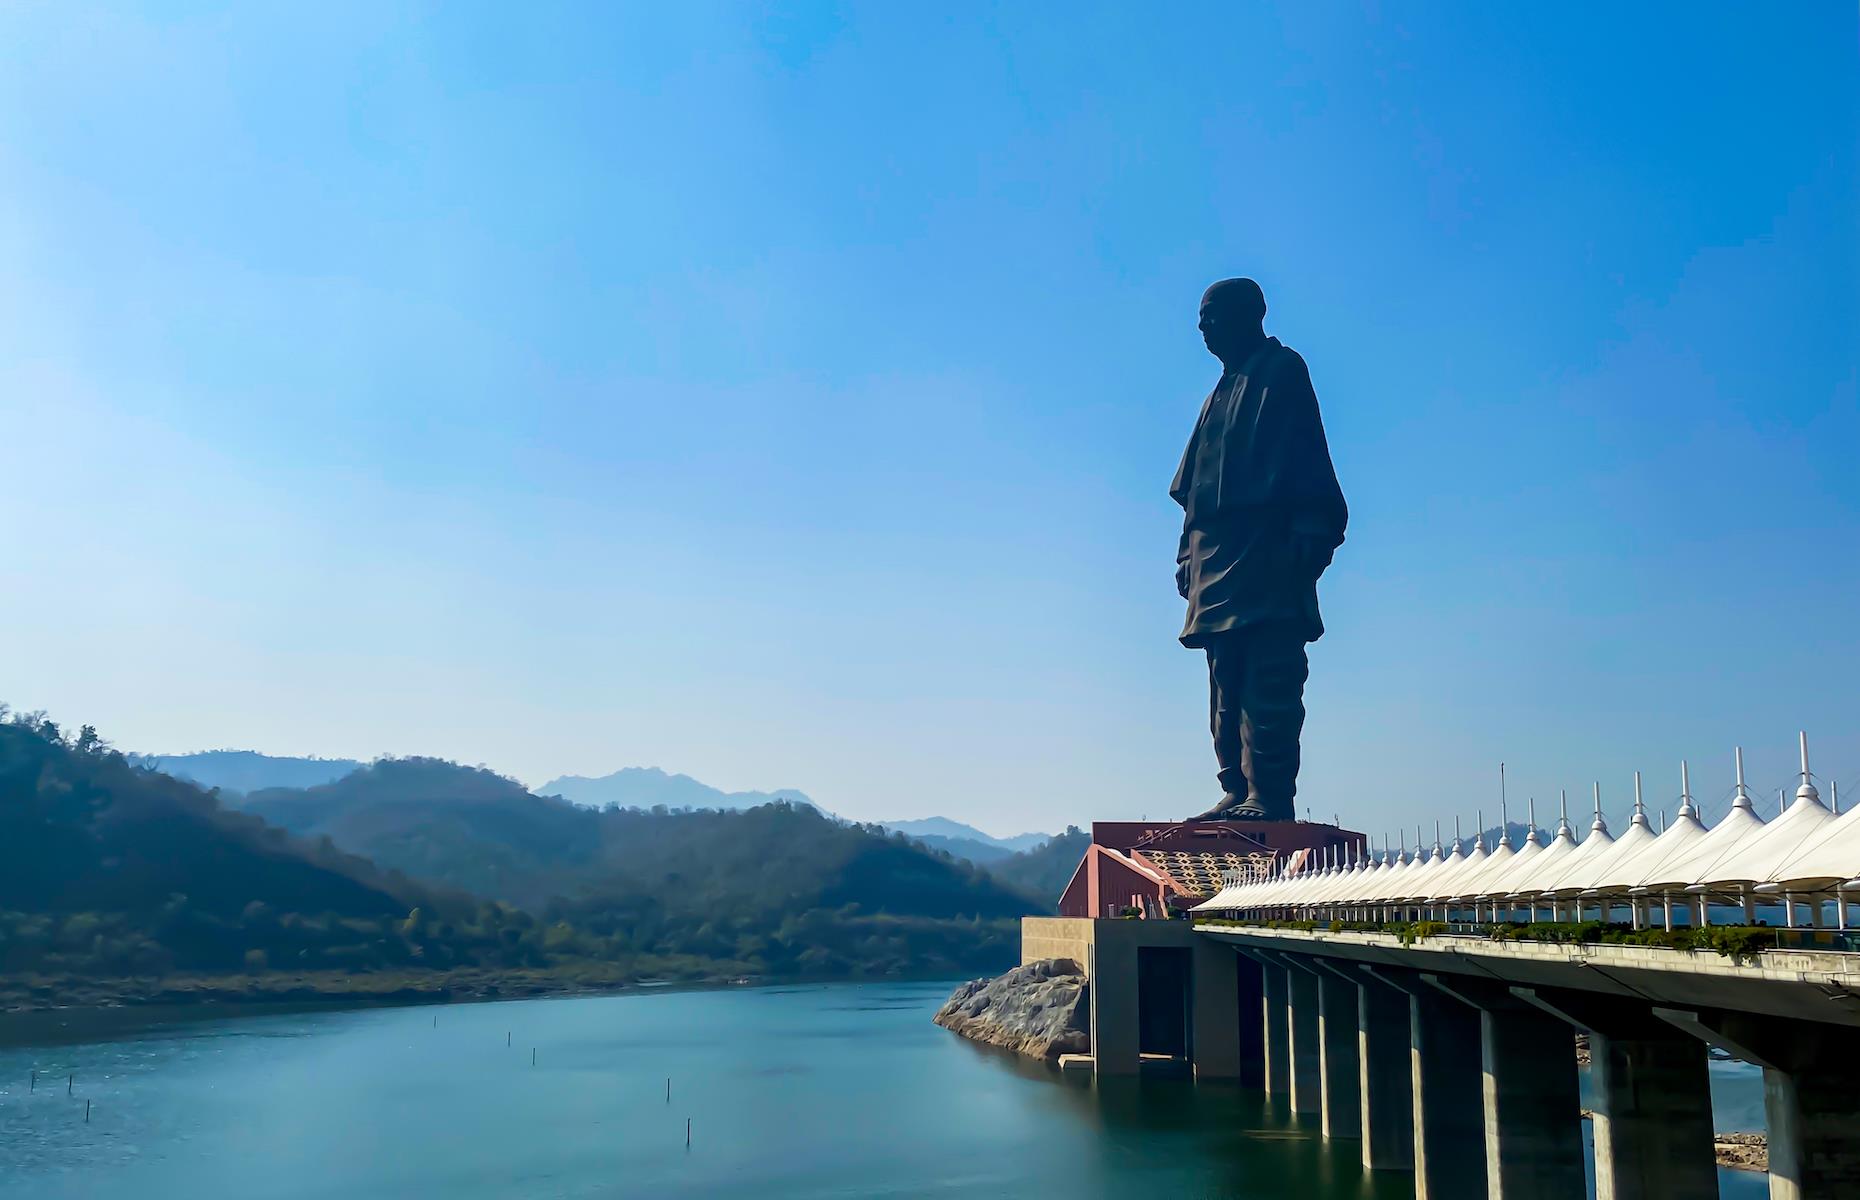 <p>Towering above the basin of the Narmada River and the Sardar Sarovar dam in Gujarat state, surrounded by the Satpura and Vindhyachal hills, the Statue of Unity depicts independence leader Sardar Vallabhai Patel. It was unveiled in 2018 and cost around $389 million. At 597 feet (182m) it is twice the size of the Statue of Liberty and claimed the record for being the world’s tallest statue from China’s Spring Temple Buddha, which sits at a comparatively piddling 420 feet (128m) high. </p>